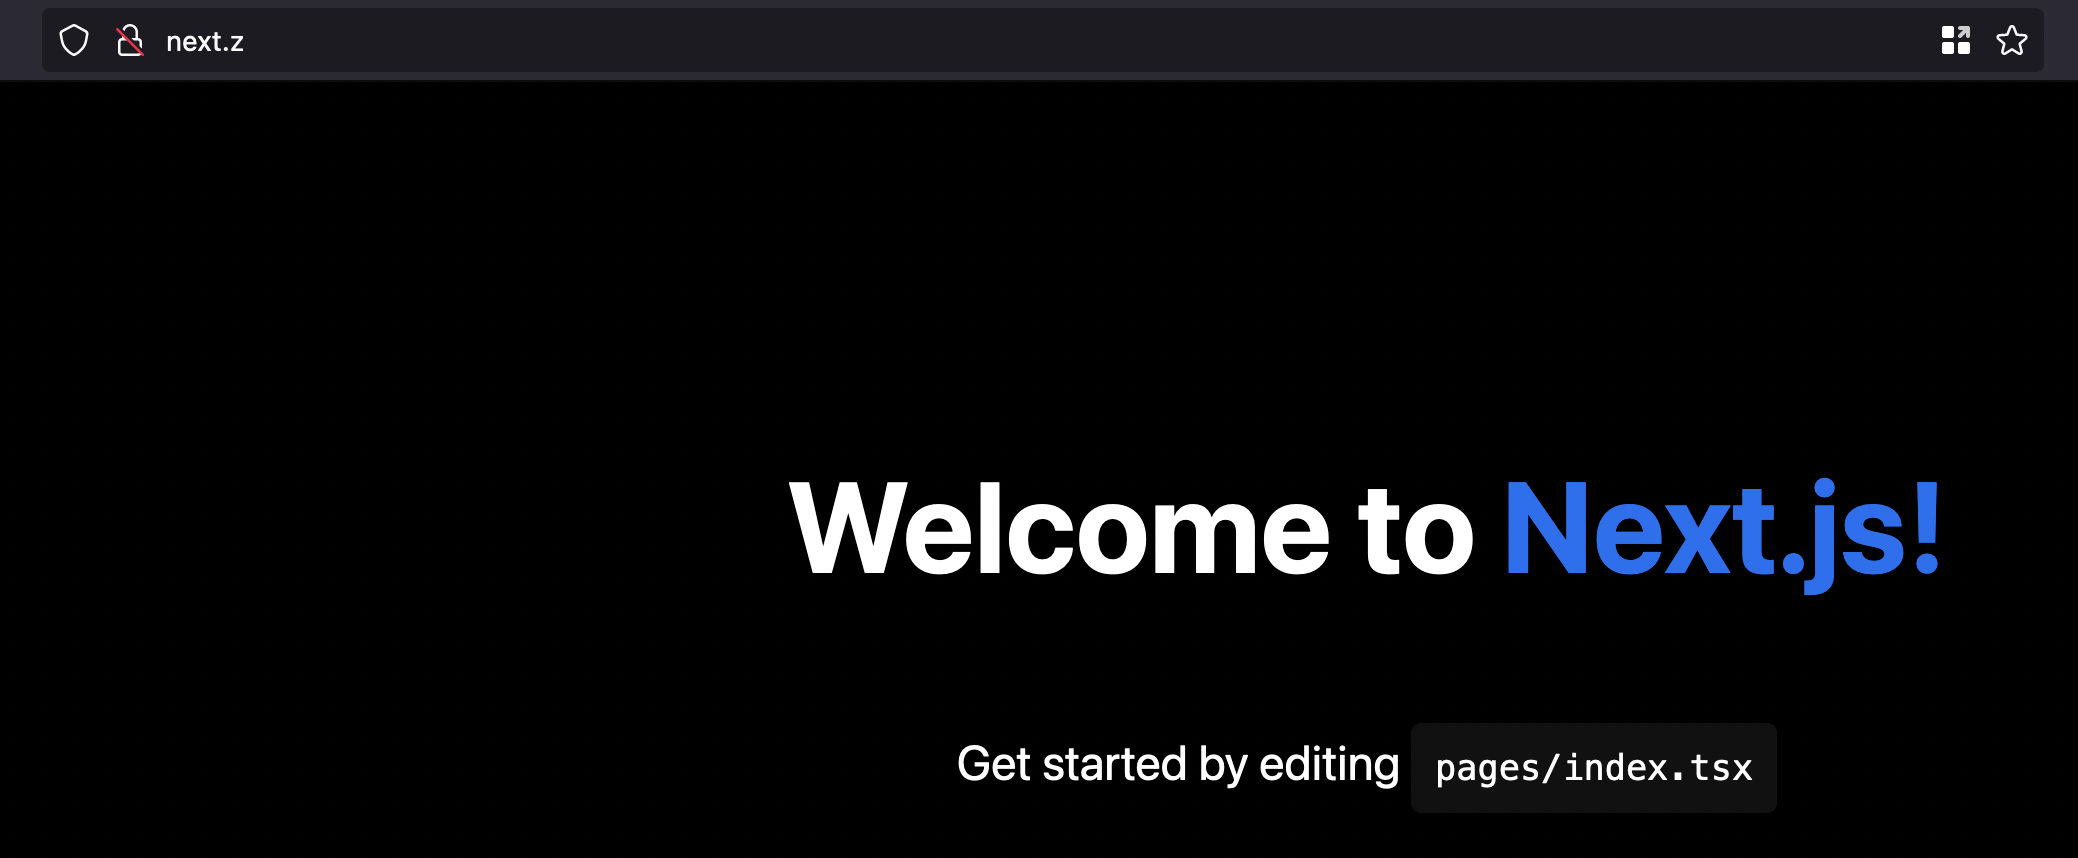 A screenshot of Firefox with next.z in the URL bar, showing the Nextjs welcome screen.